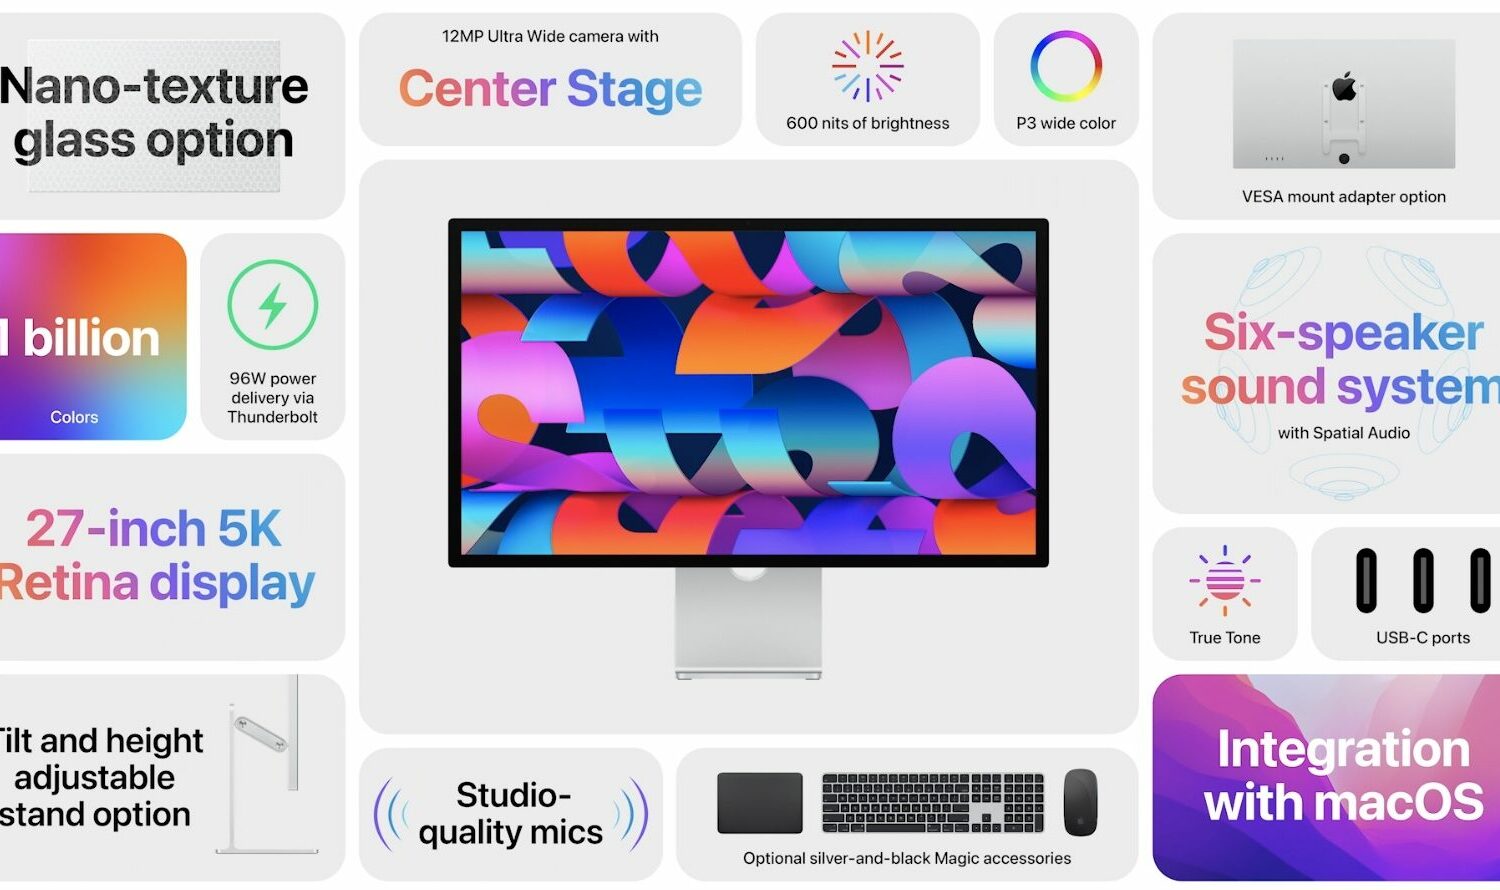 Marketing image showcasing the key features of Apple's Studio Display monitor